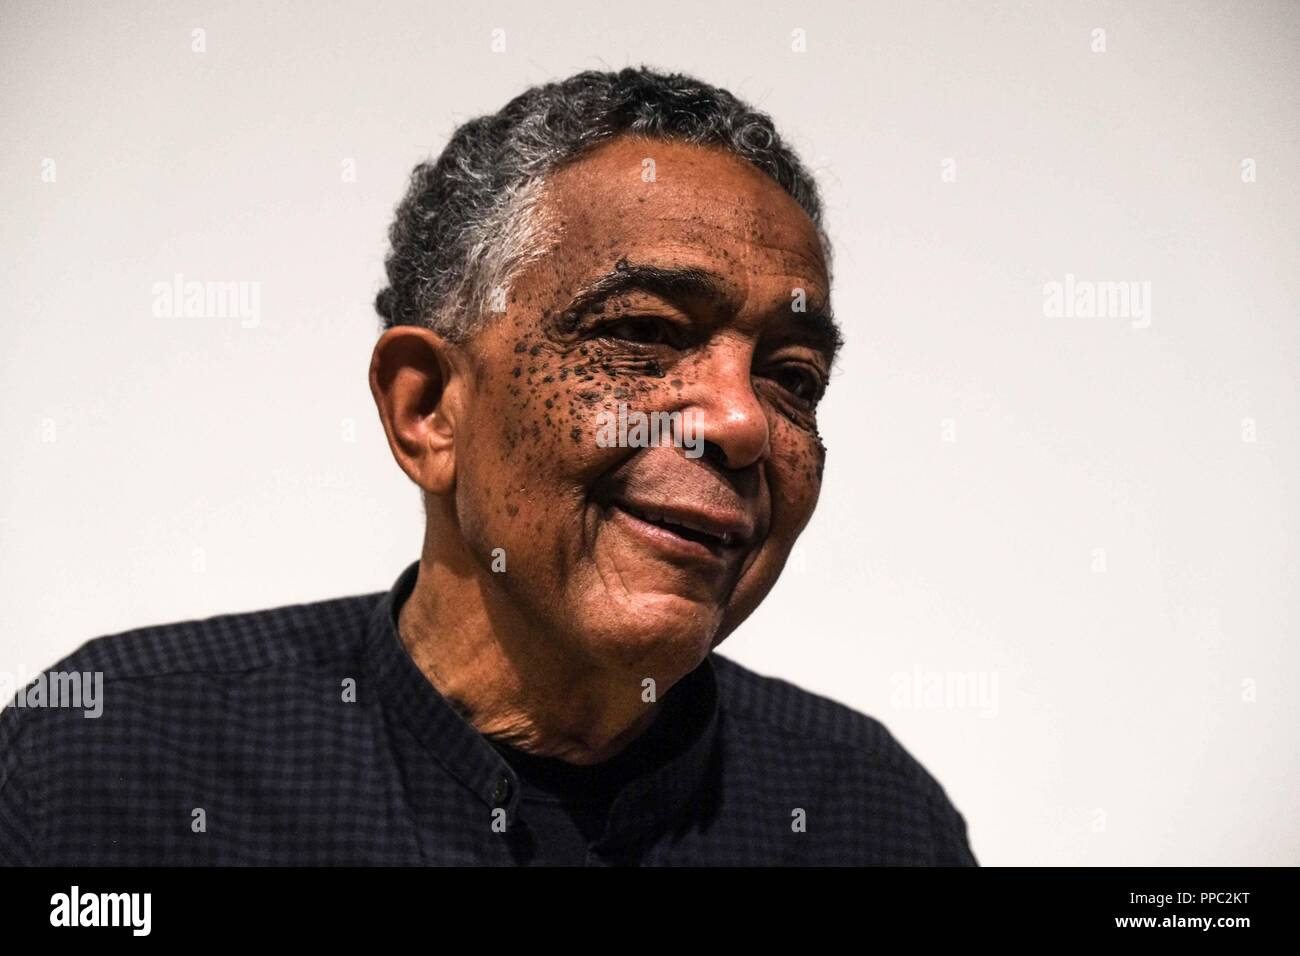 London 25th September 2018: Fred Eversley creator of  Untilted ( Parabolic Lens). Space Shifters at Hayward Gallery features artworks spanning a period of roughly 50 years by 20 leading international artists. Space Shifters at Hayward Gallery runs fron 26th September 2018 - 6th January 2019. Credit: Claire Doherty/Alamy Live News Stock Photo